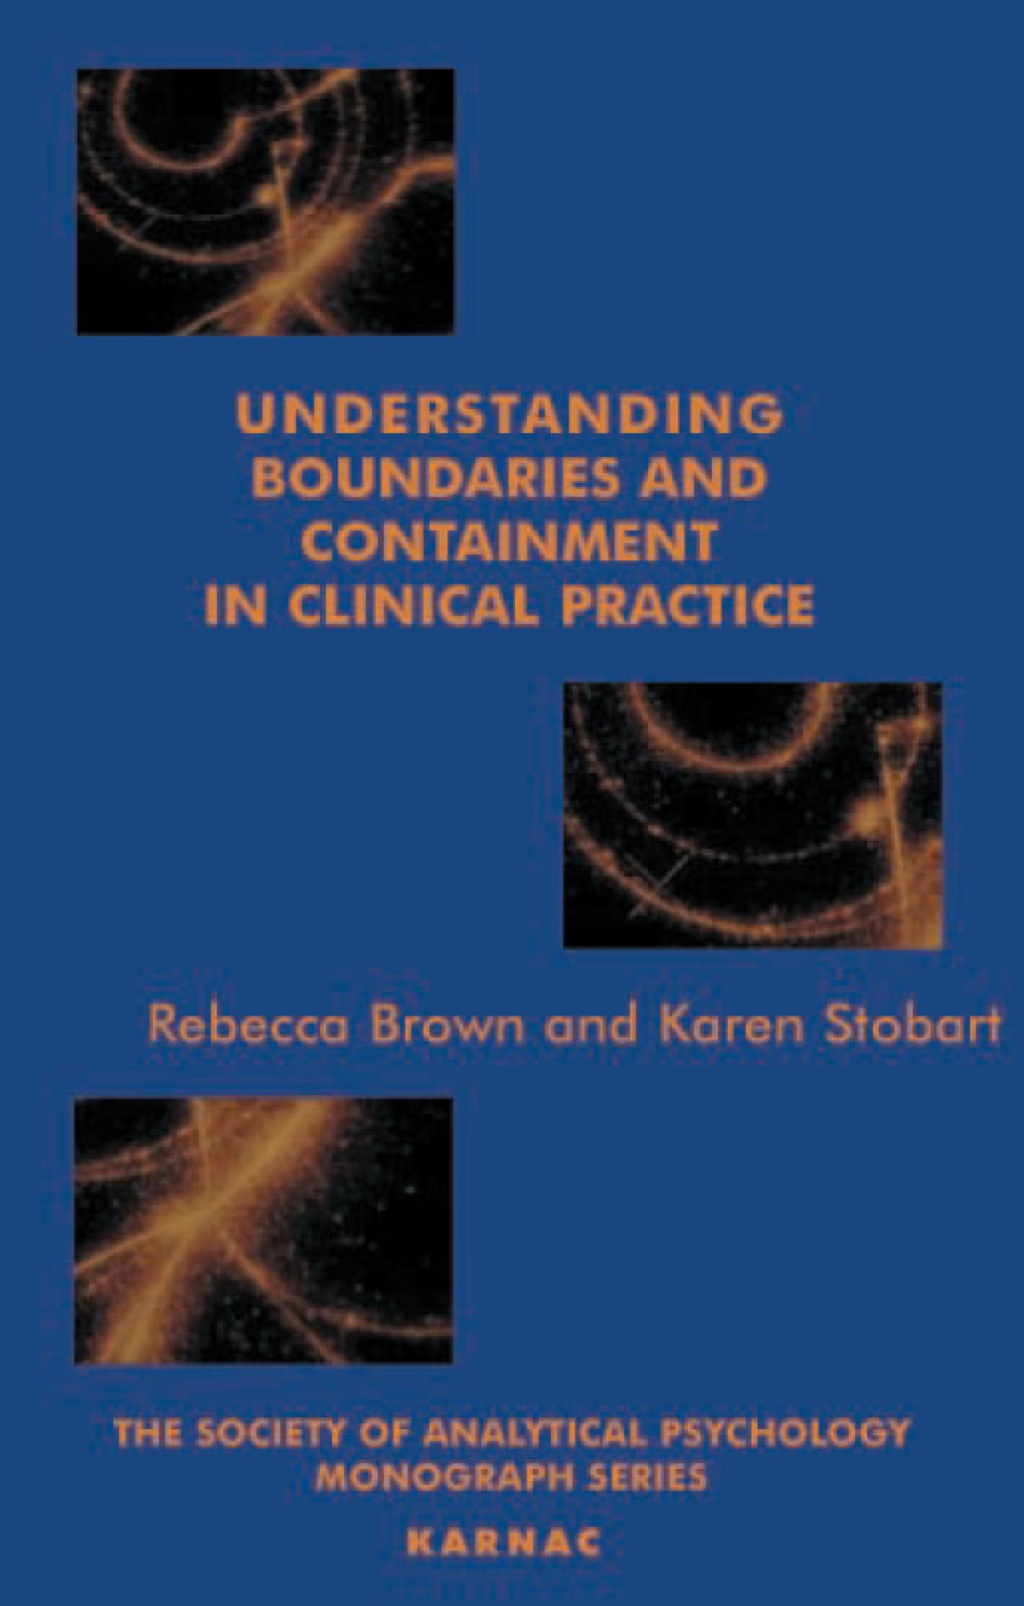 Understanding Boundaries and Containment in Clinical Practice (eBook) - Rebecca Brown,